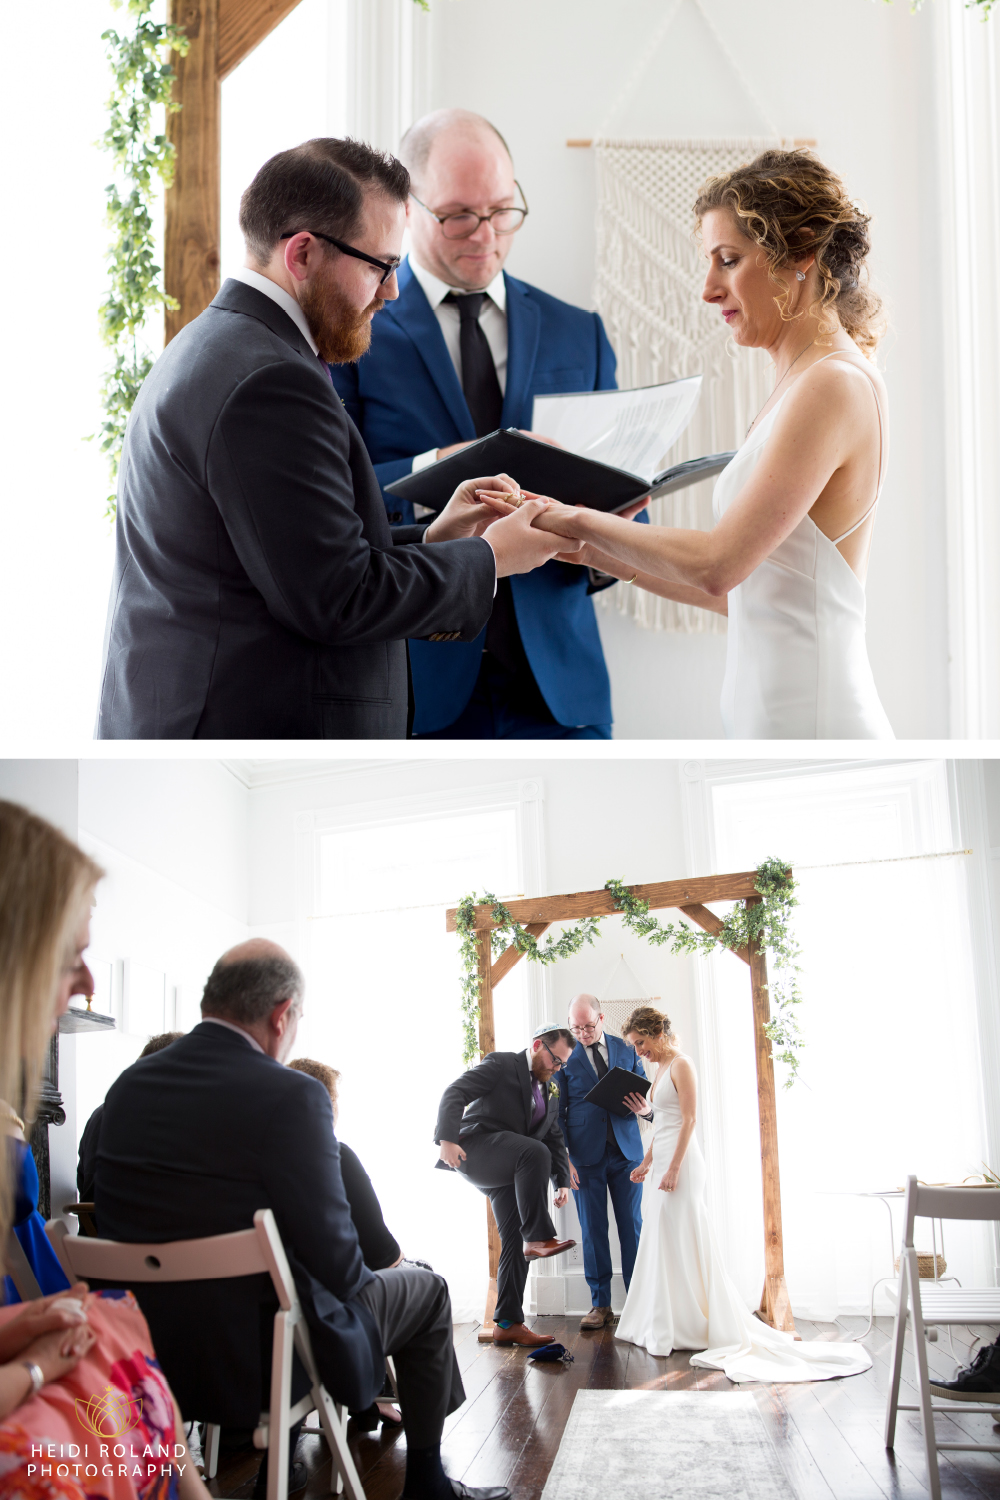 exchange the rings, breaking the glass at Vaux wedding ceremony 